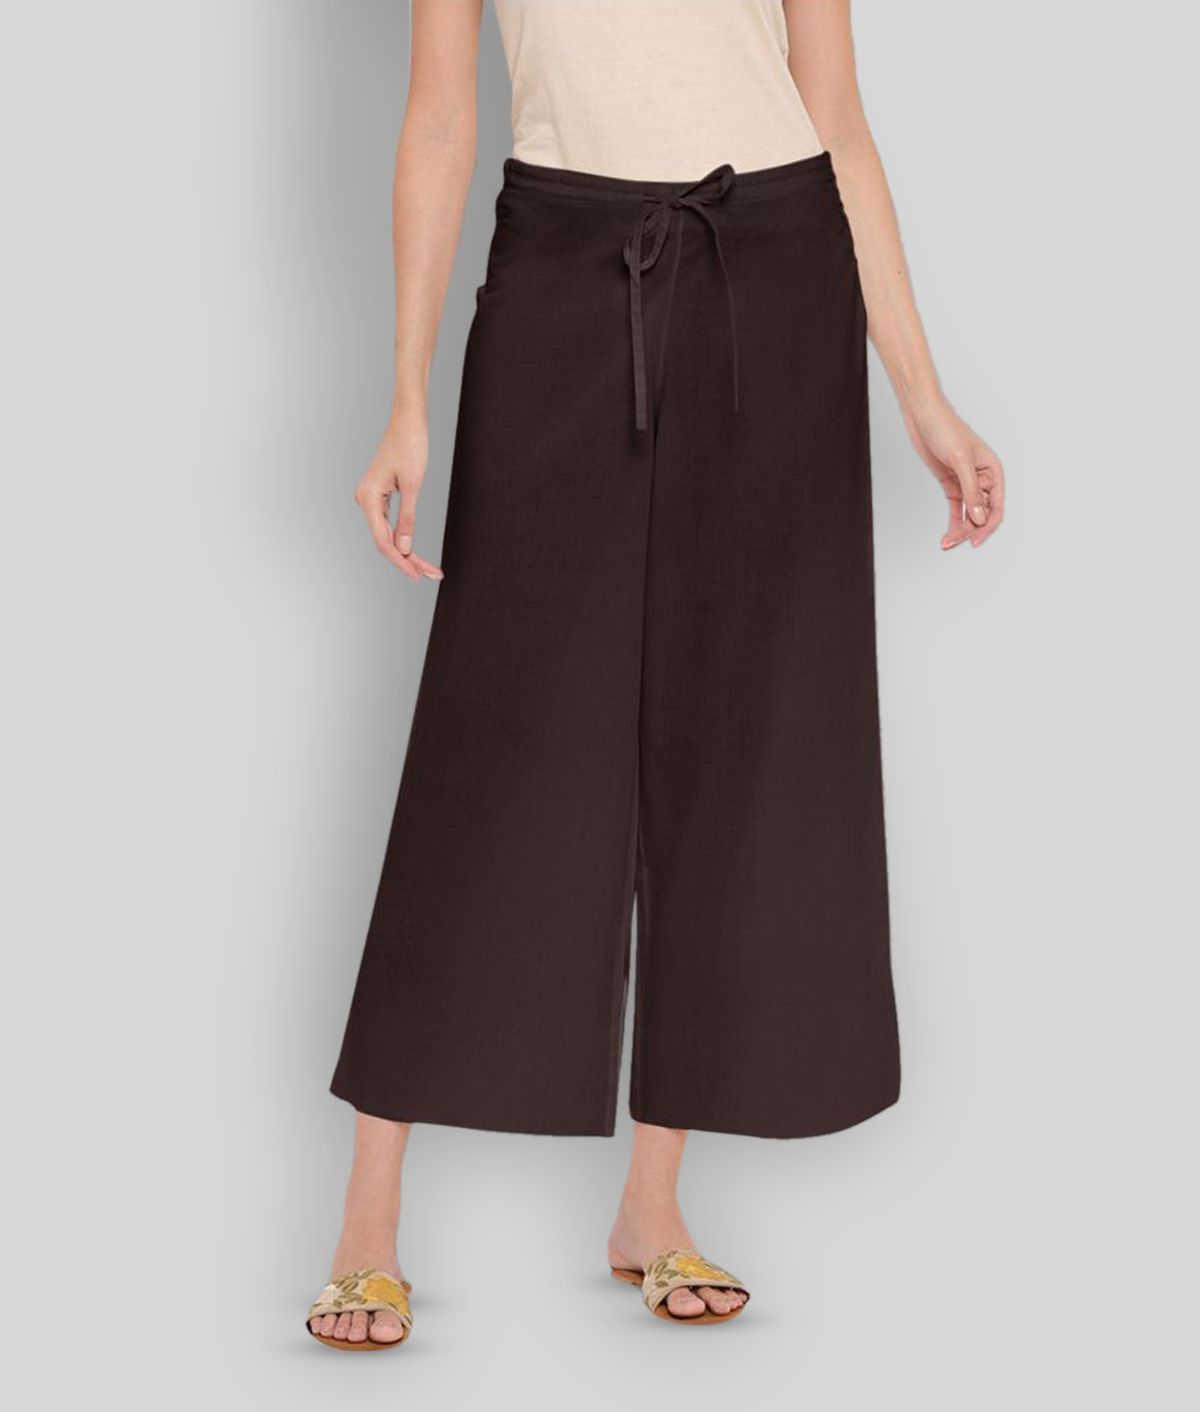 Janasya - Brown Cotton Flaired Women's Culottes ( Pack of 1 )